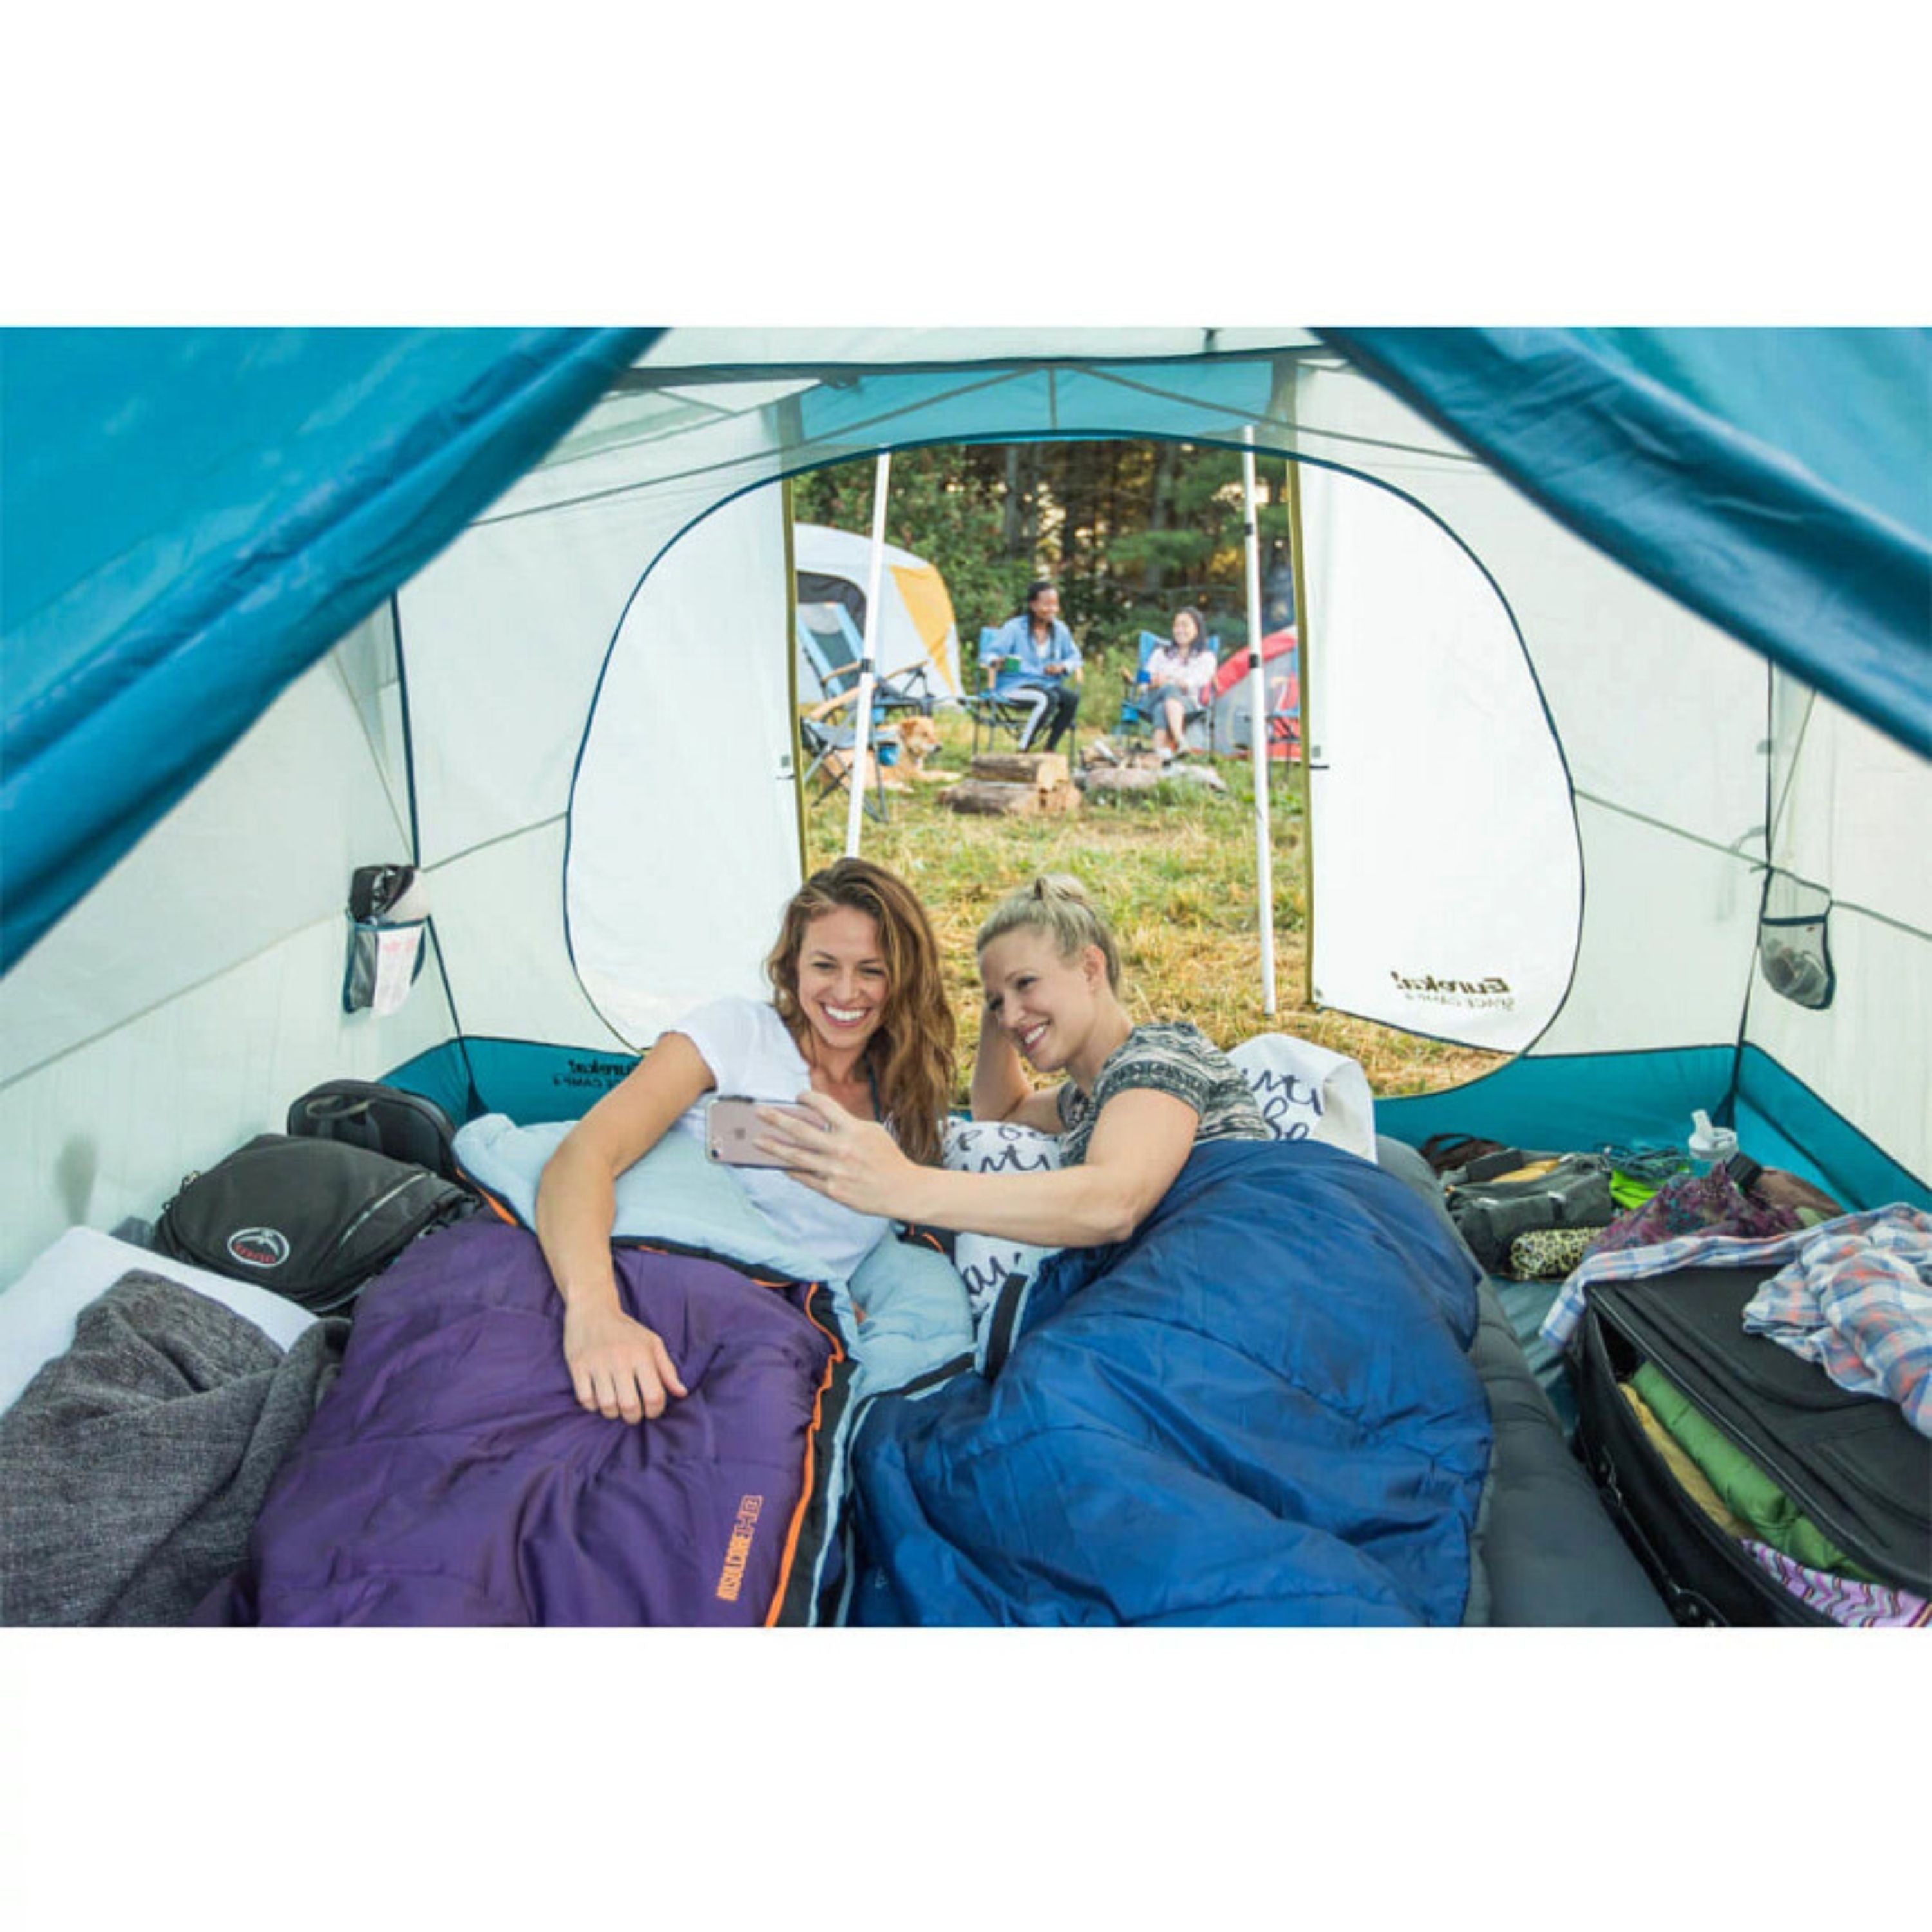 "Space camp" tent - 4 person